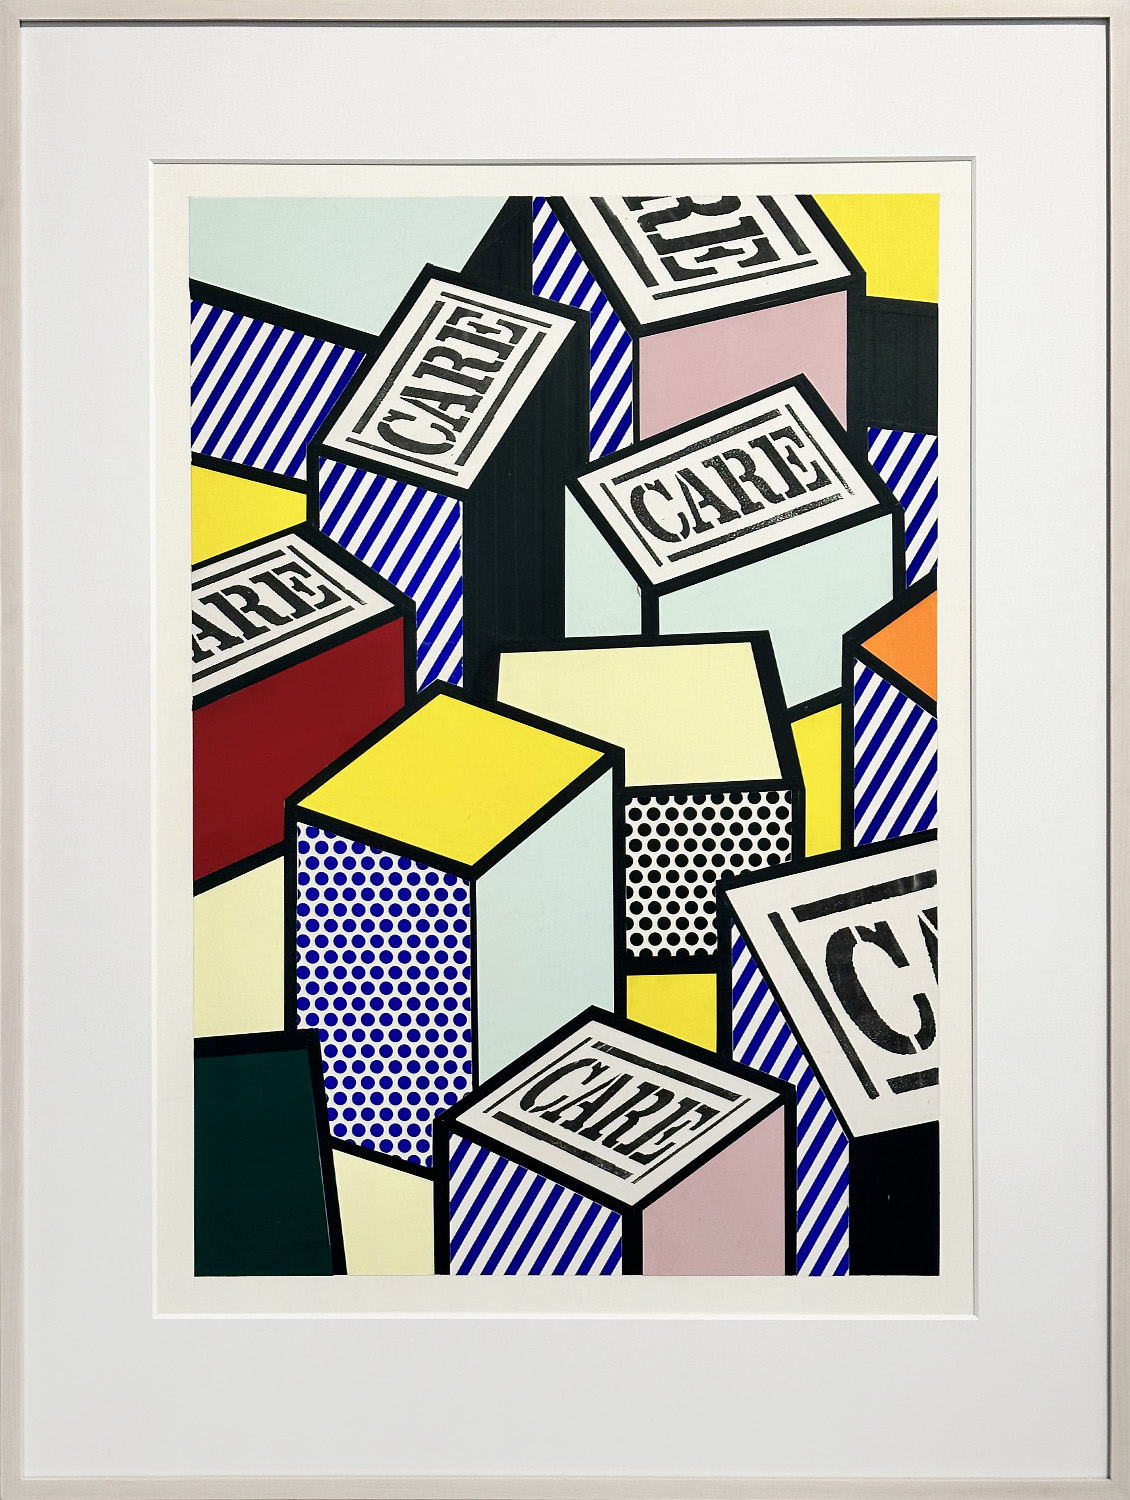 Roy Lichtenstein collage for "CARE" poster in bright colors